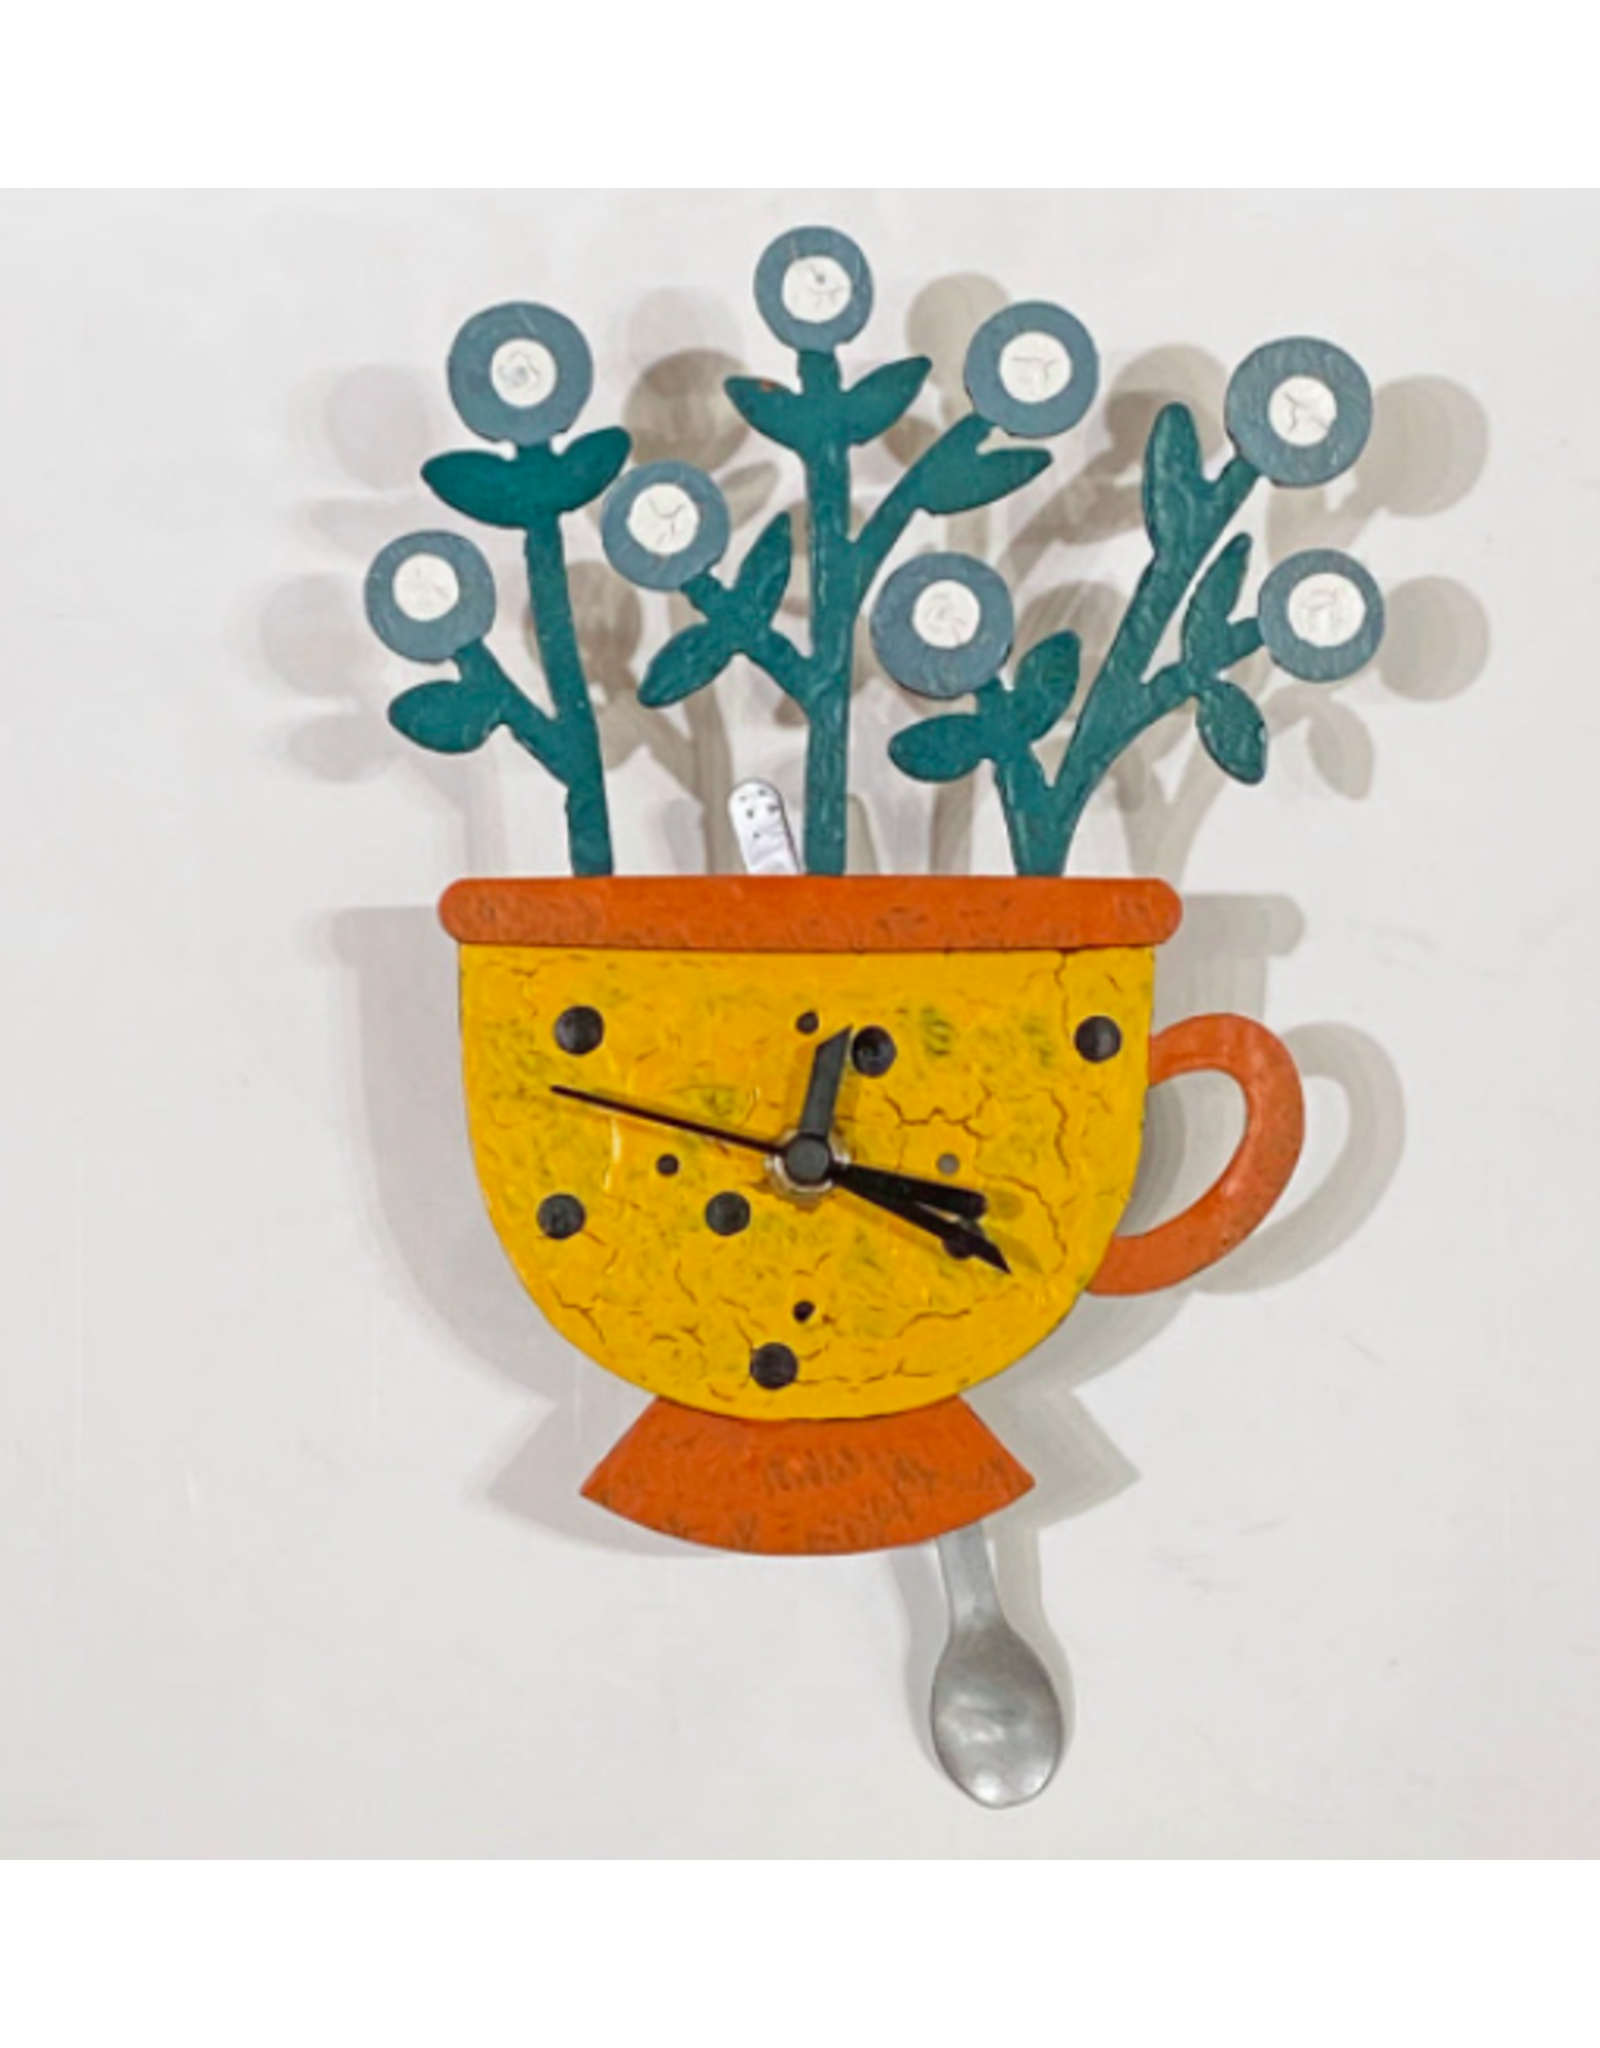 Trade roots Teacup Wall Clock, Yellow, Colombia